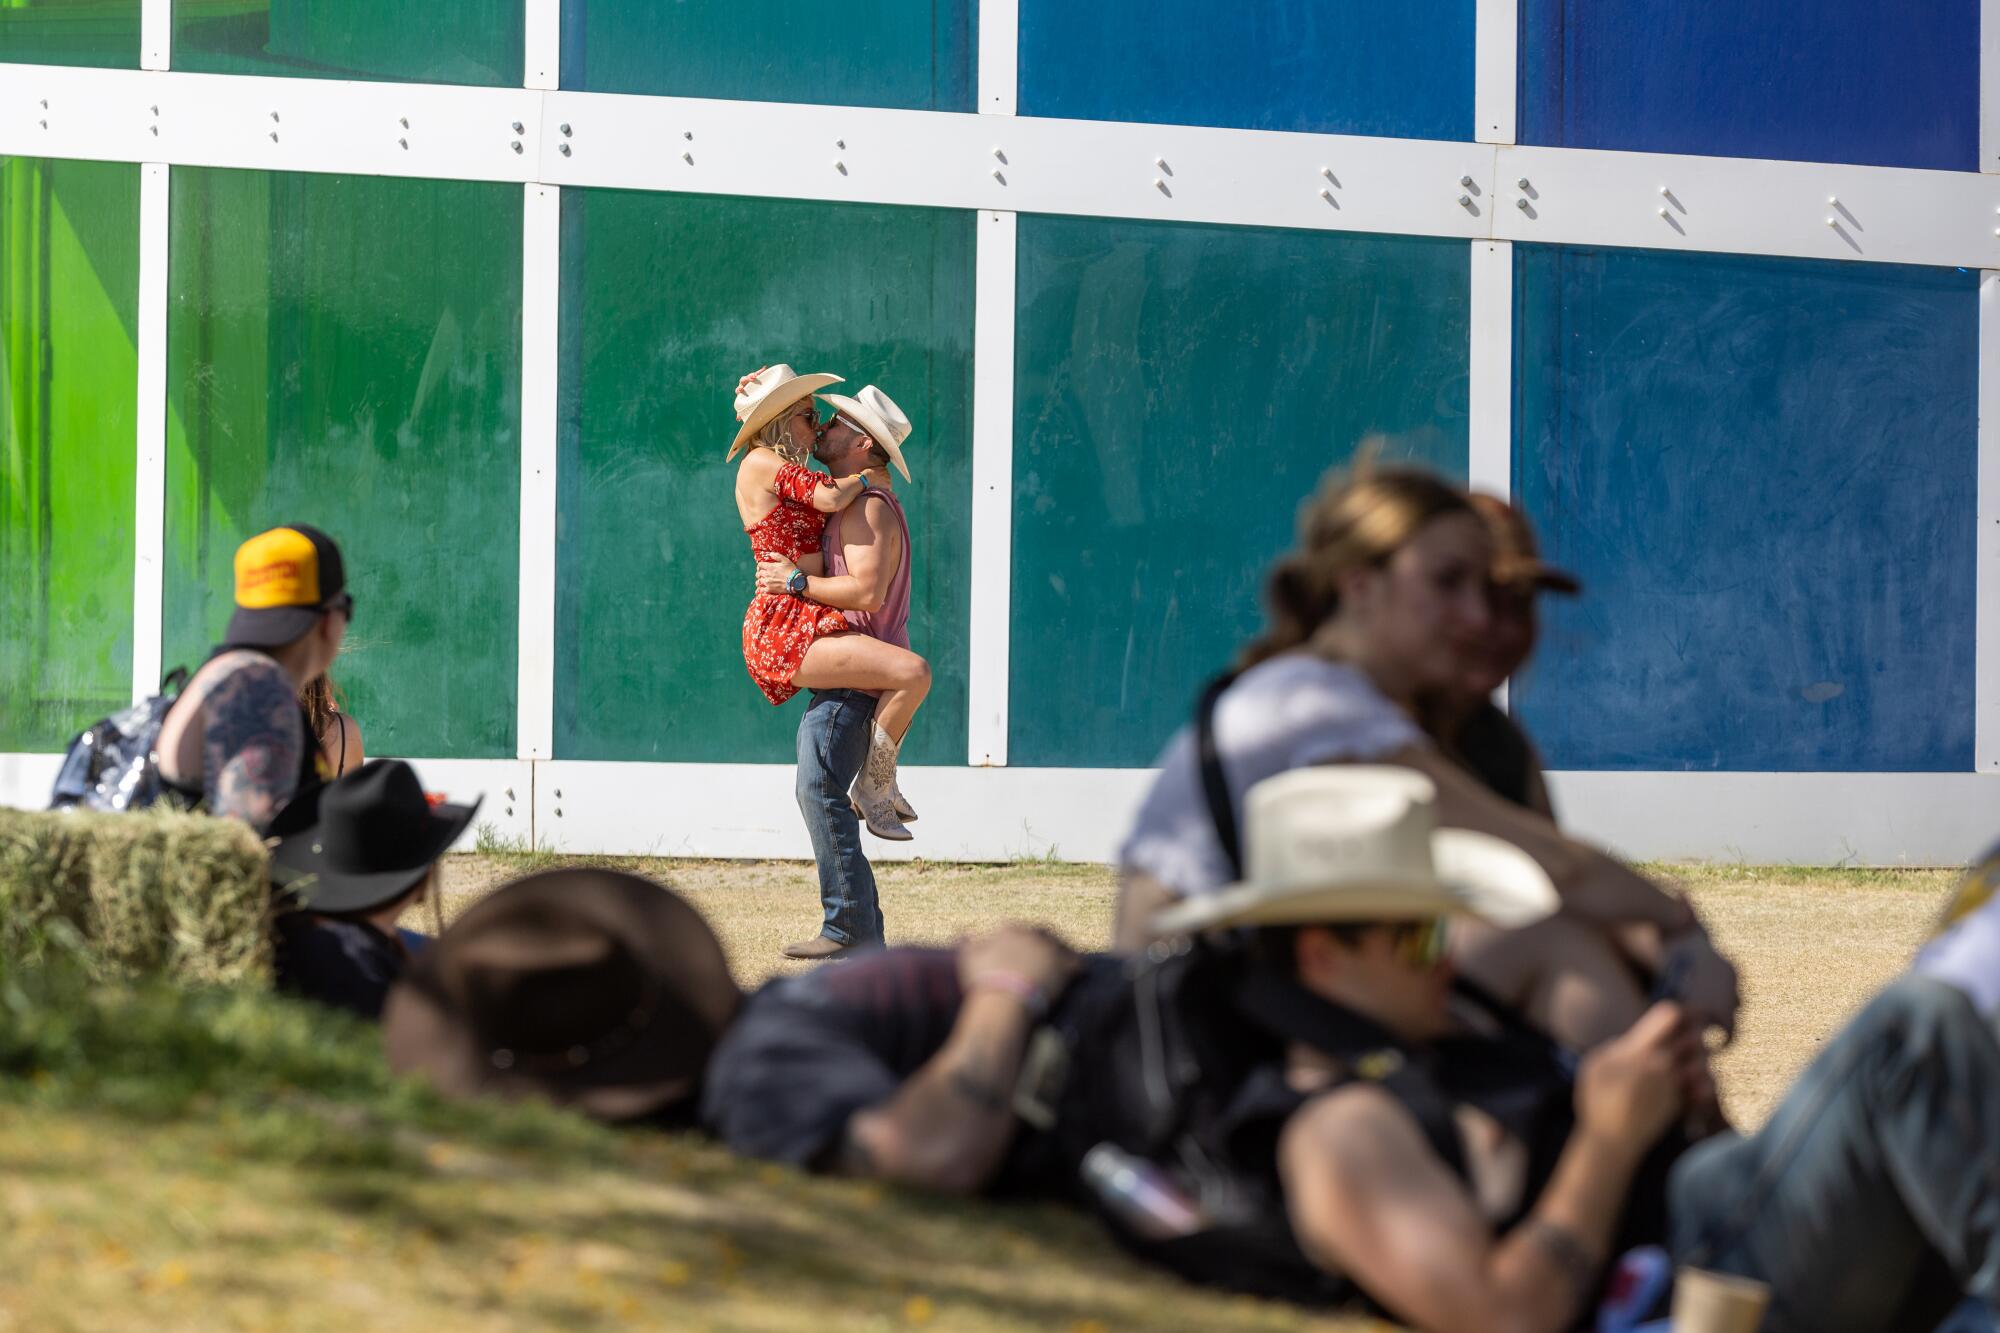 One couple kisses while another takes a nap and rests in the shade at the Stagecoach Country Music Festival.